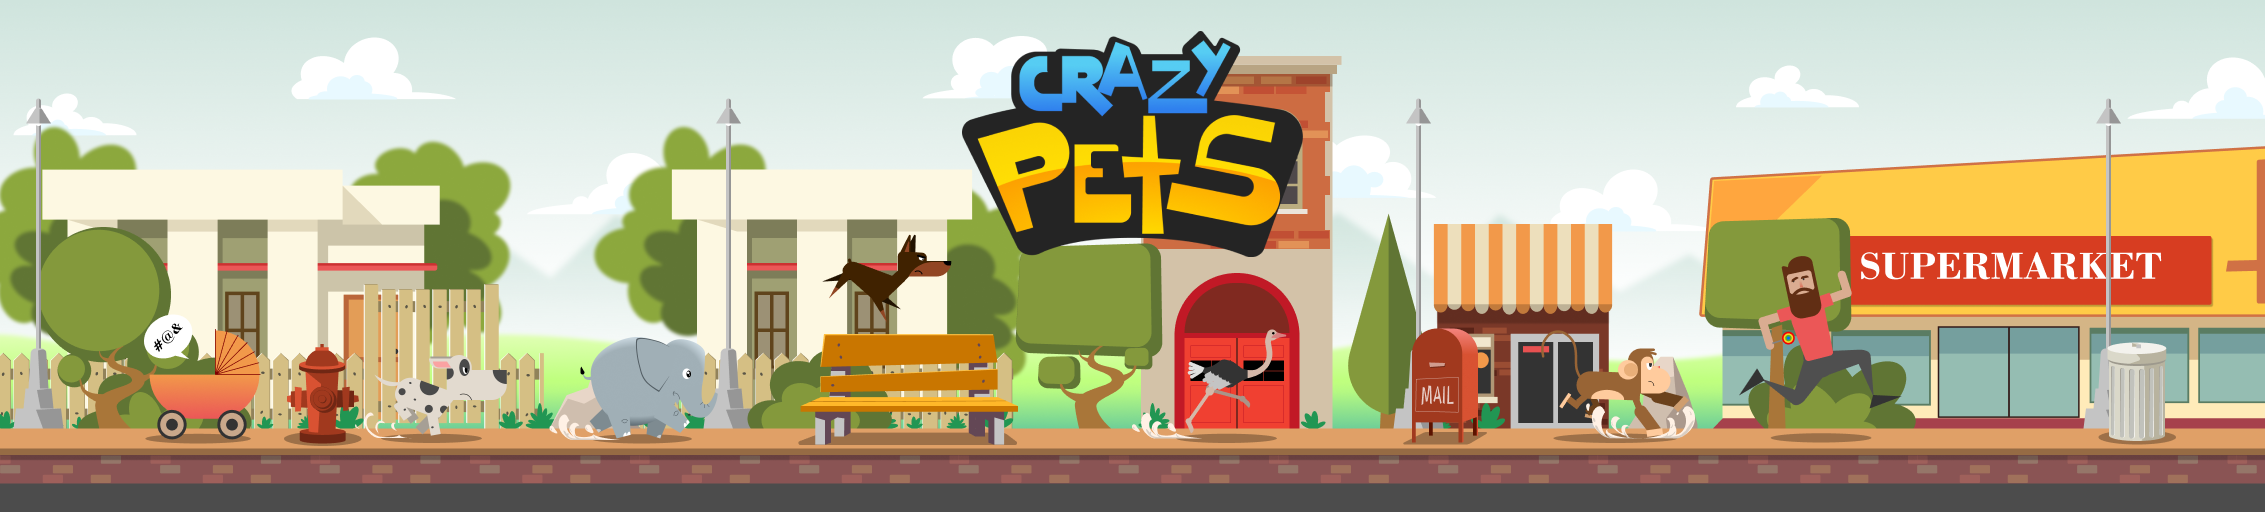 Crazy Pets - The Ultimate Chase For Candy